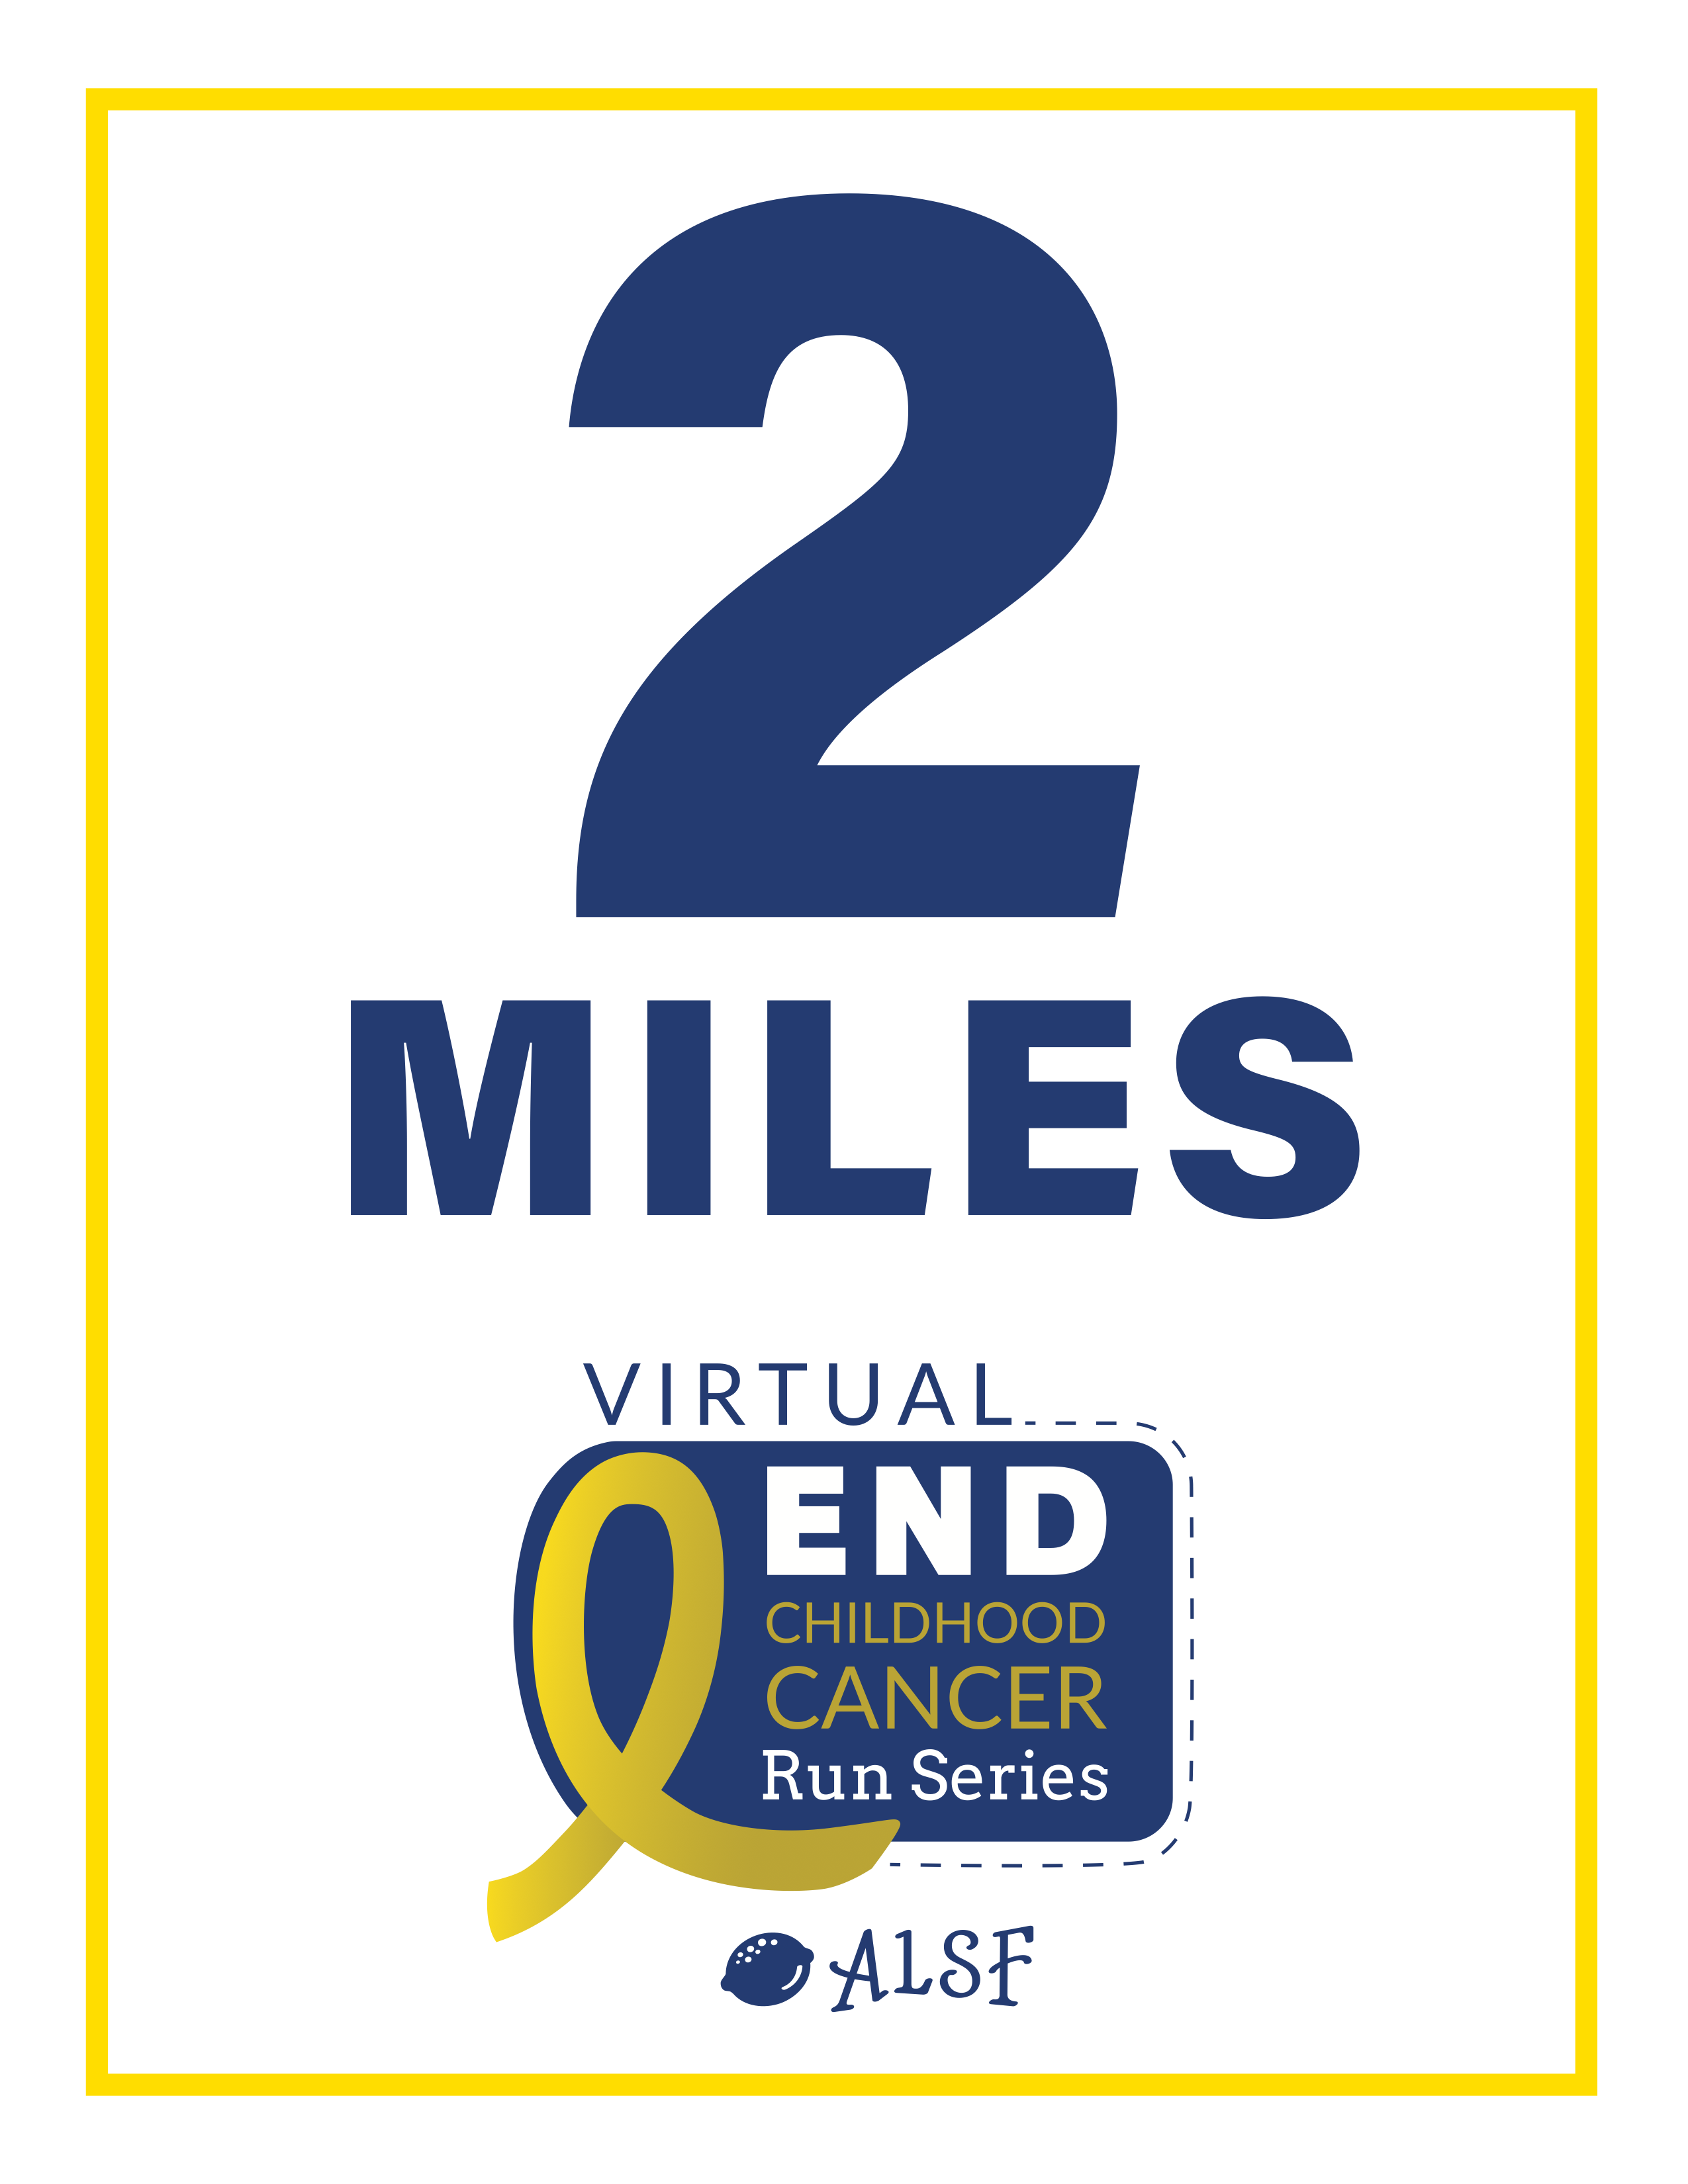 Virtual End Childhood Cancer Run Series Mile Marker - 2 Miles